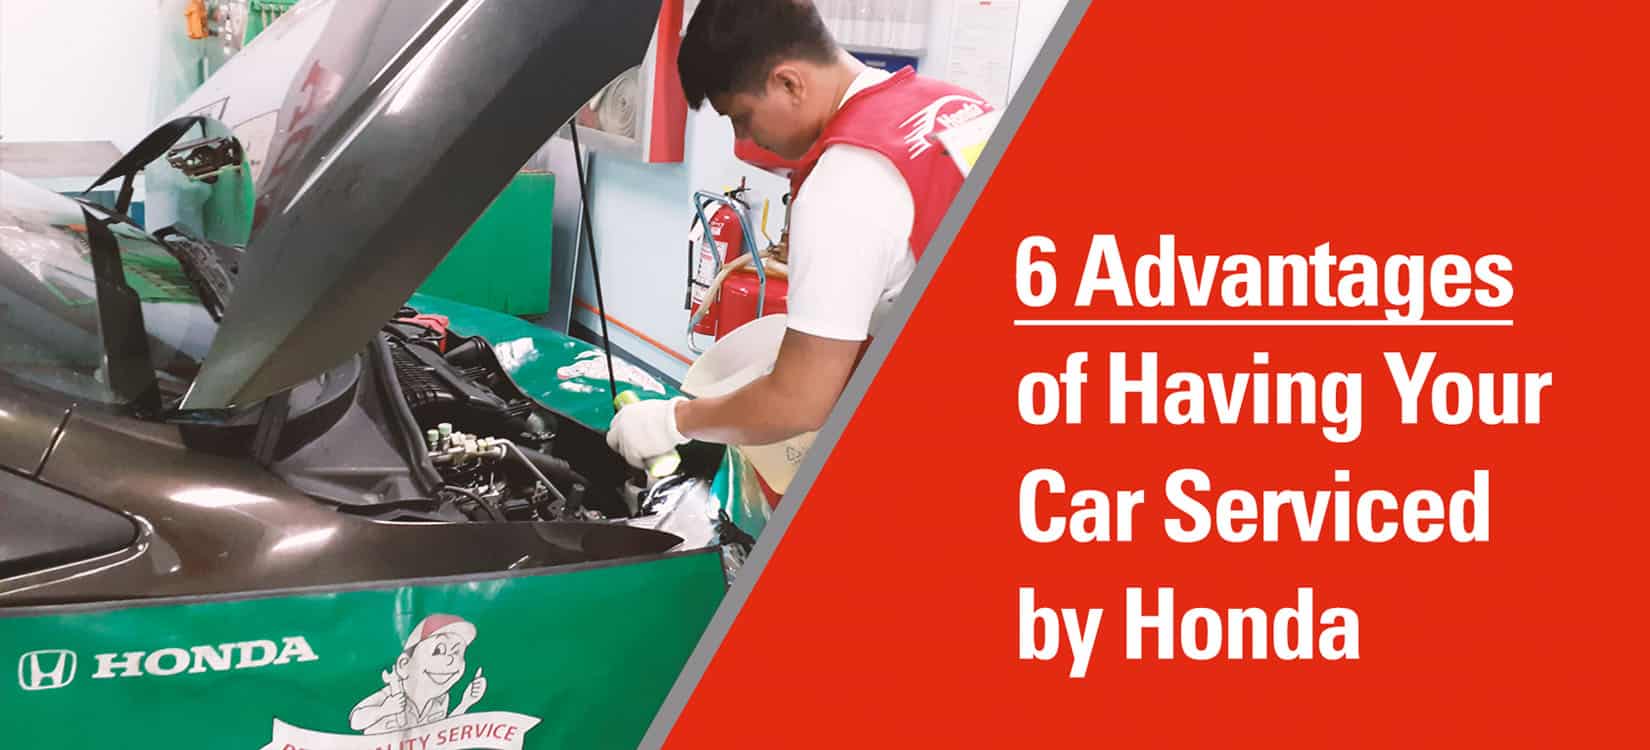 Six (6) Advantages of having your car serviced at Honda dealerships  and service centers